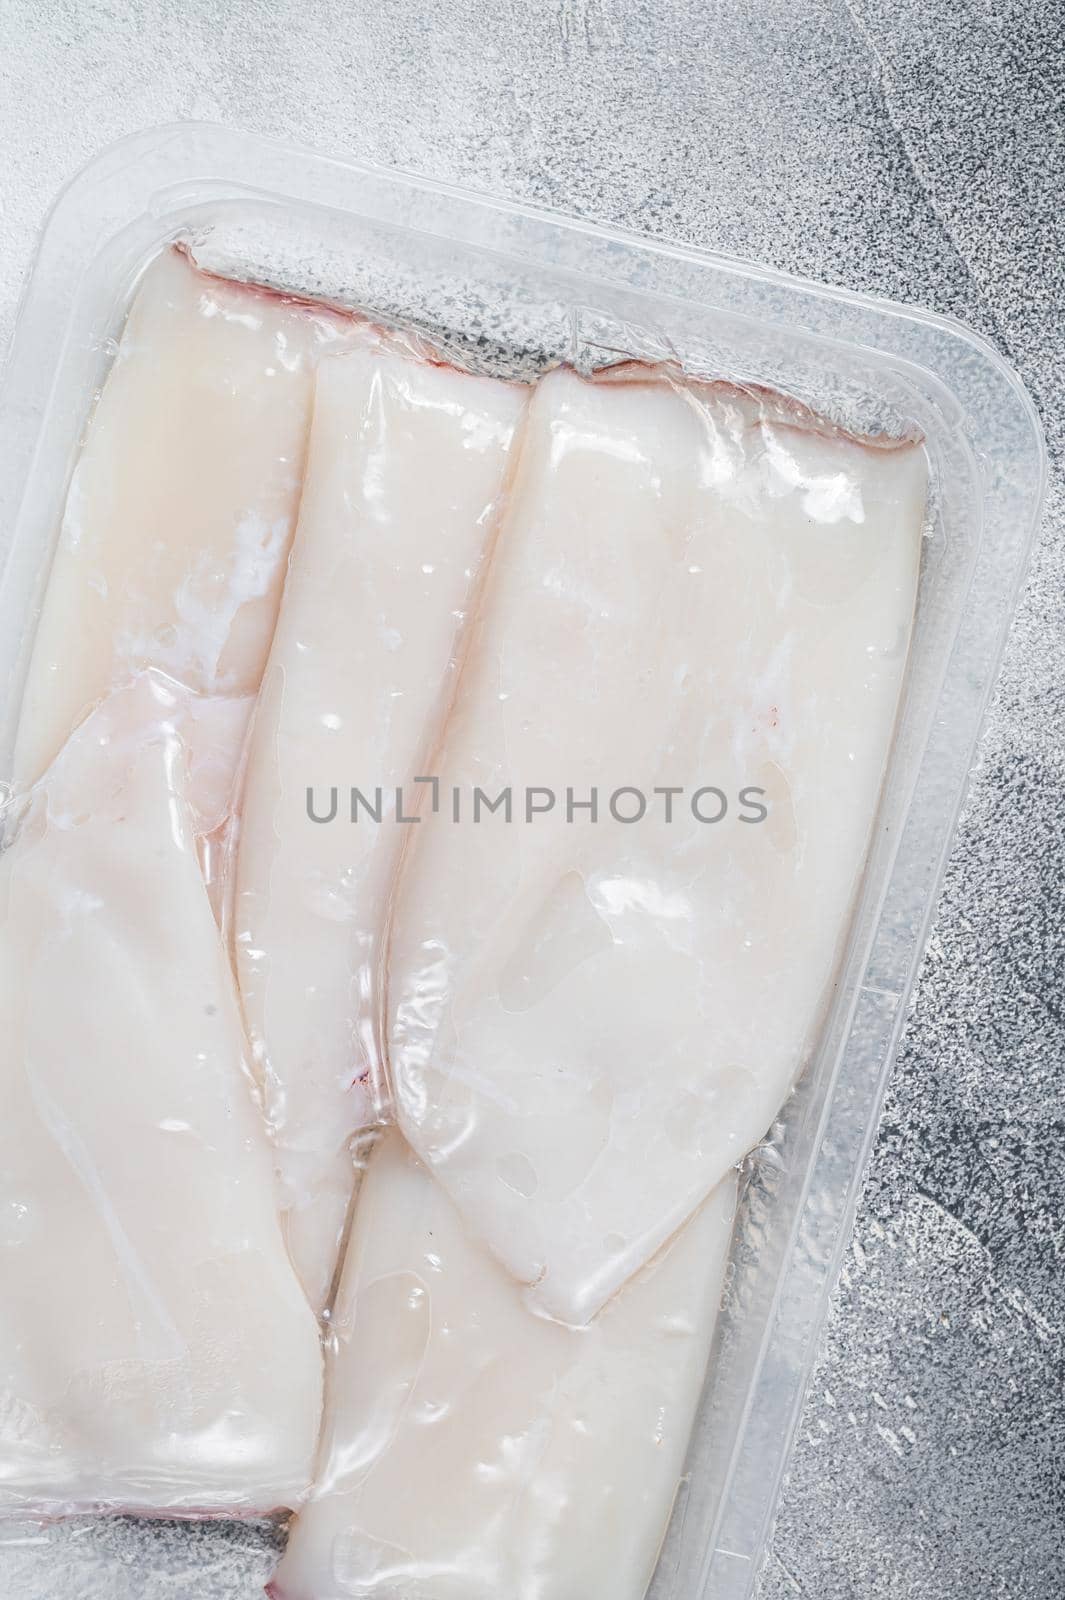 Raw squid or Calamari in a vacuum package from the supermarket. White background. Top view by Composter